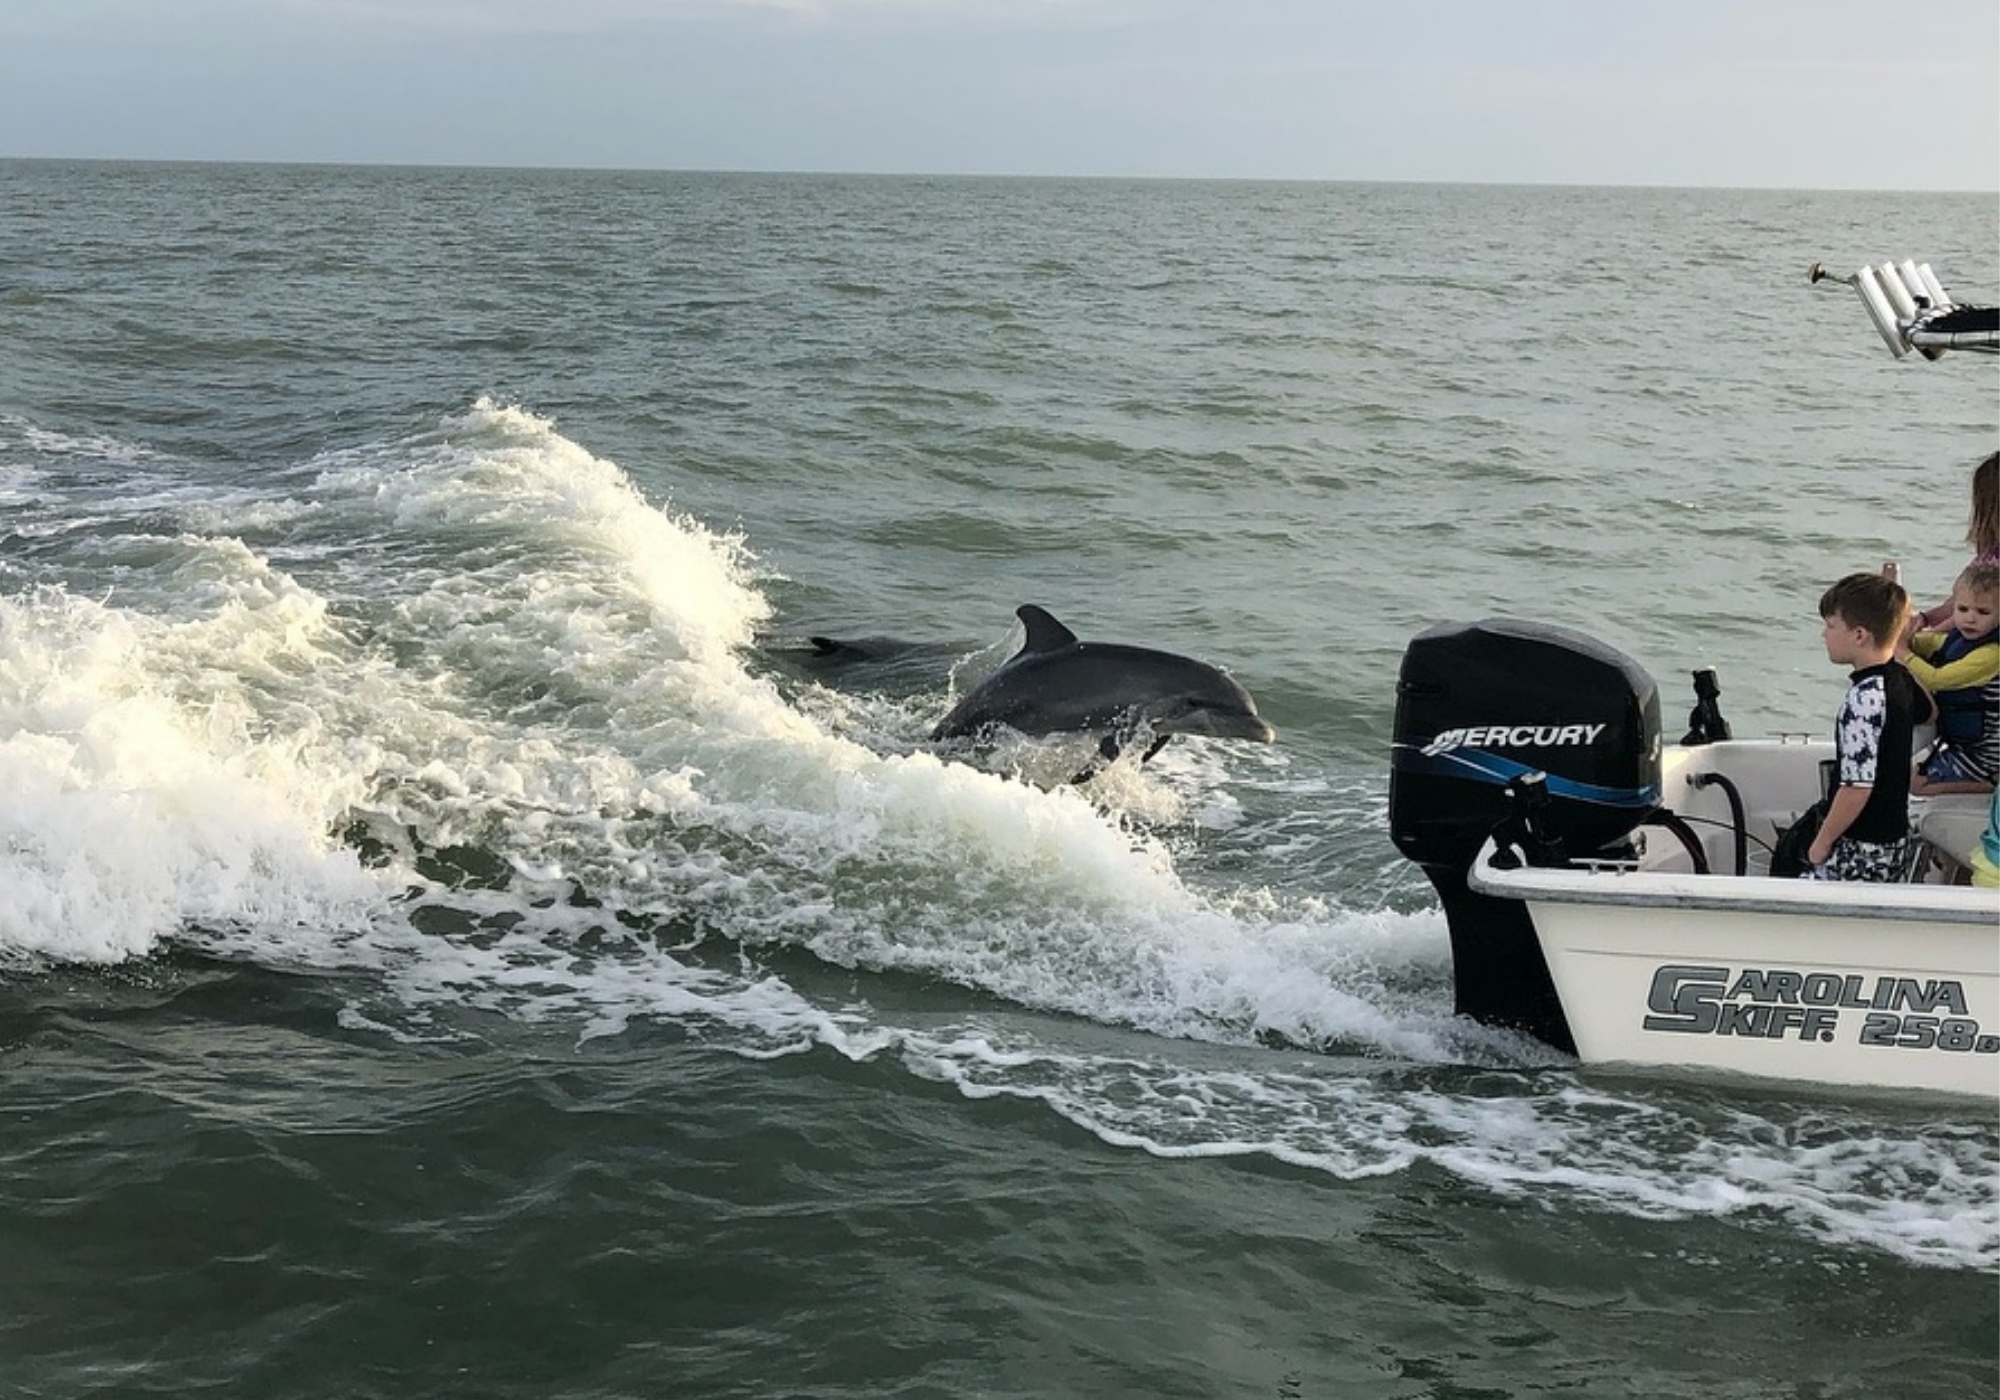 Carolina Skiff on water and dolphins